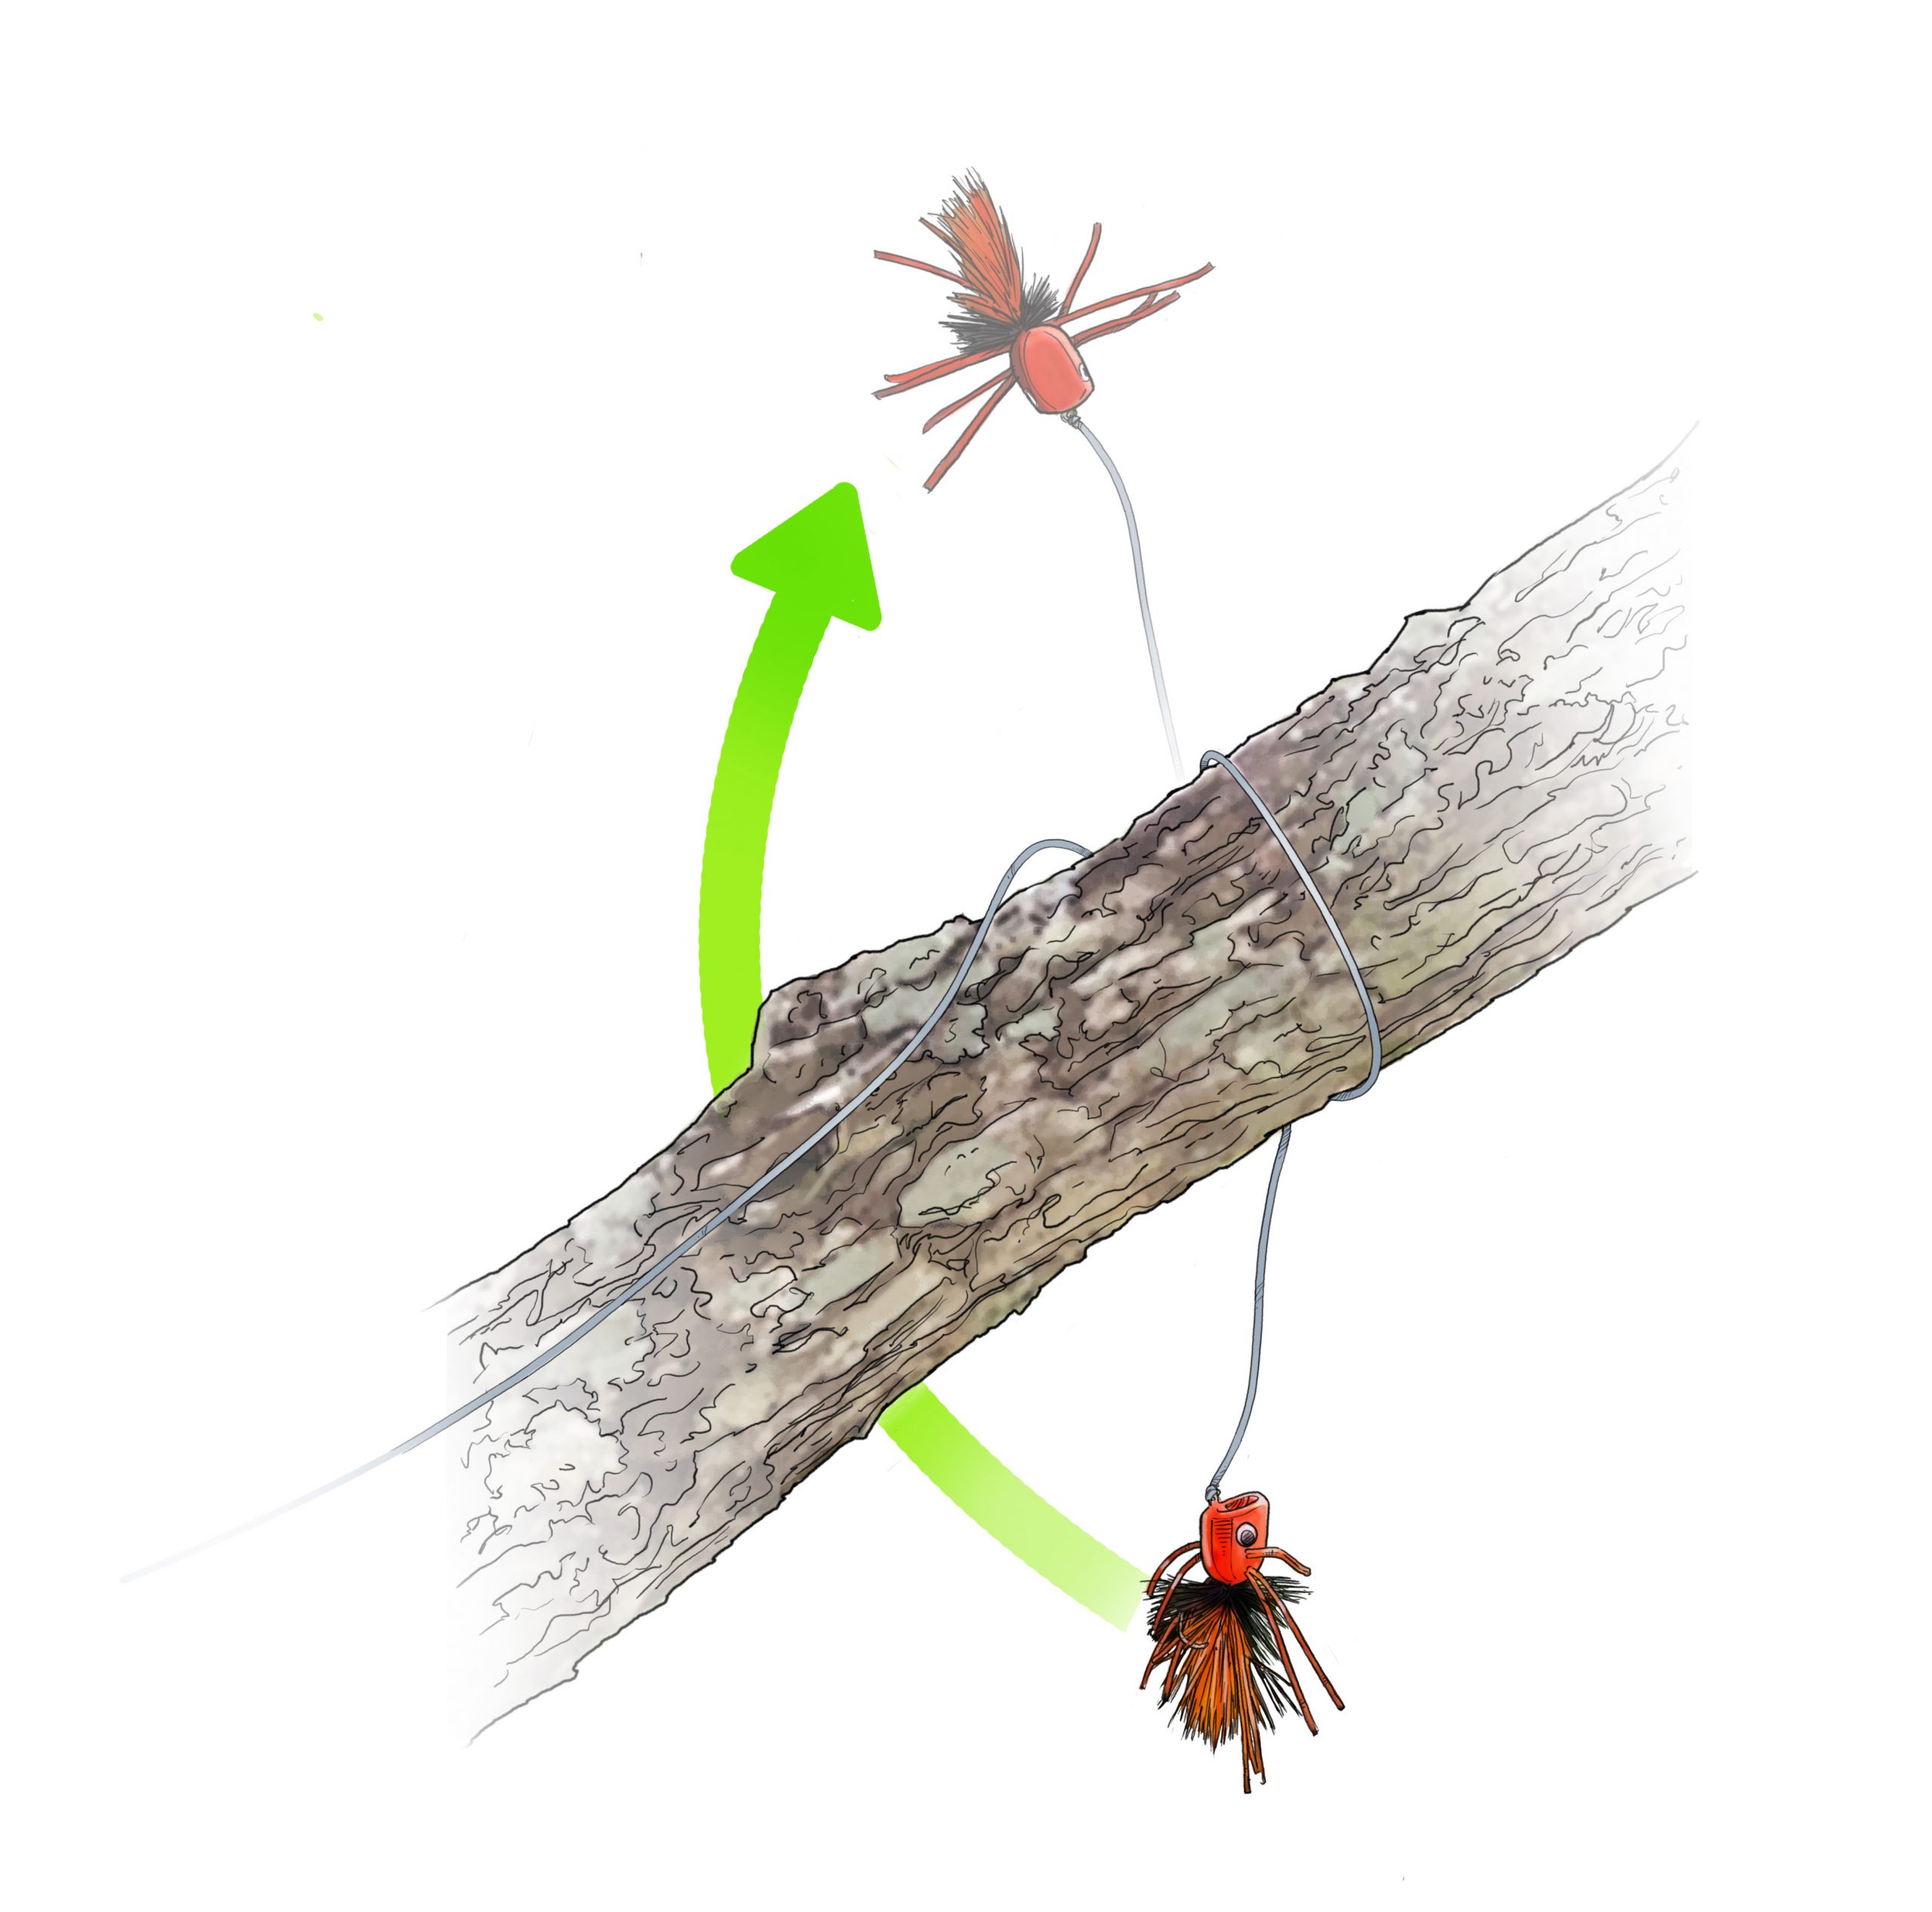 fly fishing illustration depicting the tease method to unsnag a fly